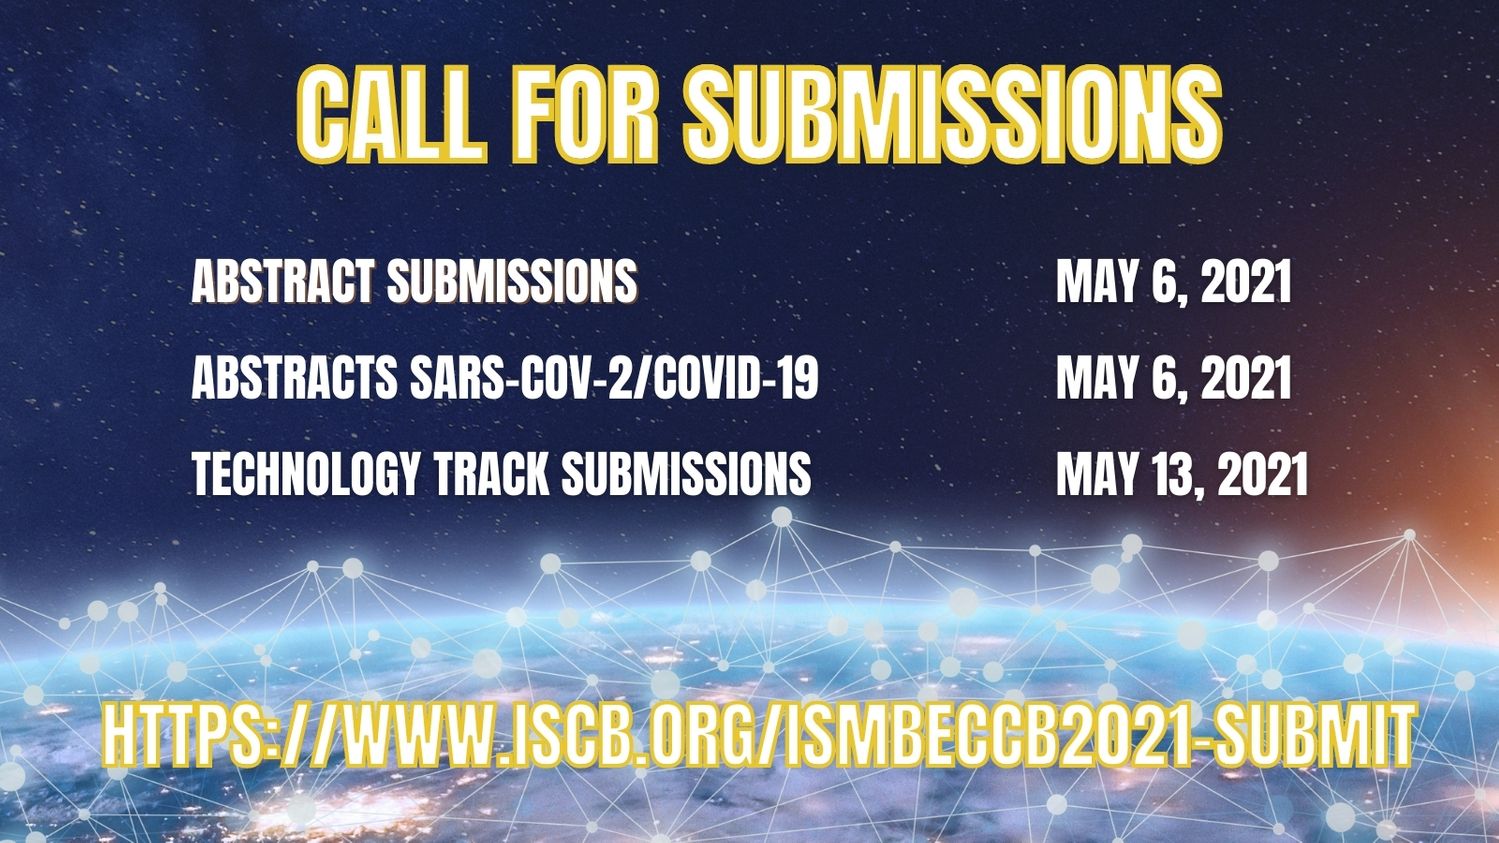 ISMB/ECCB 2021: Call for Submissions!